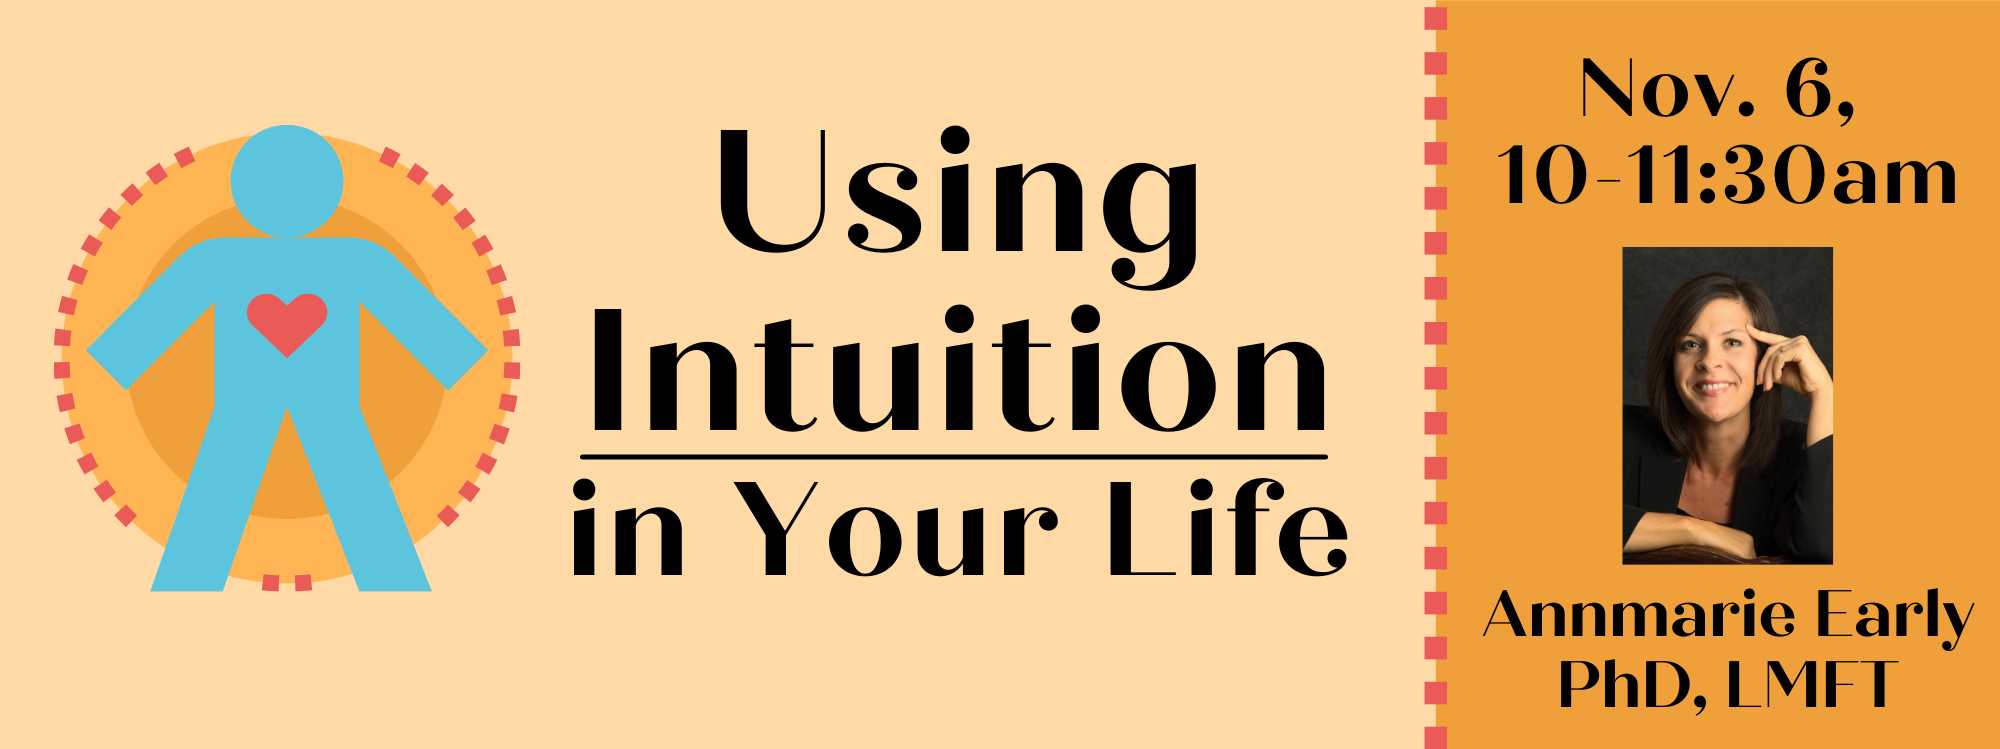 Using Intuition in Your Life